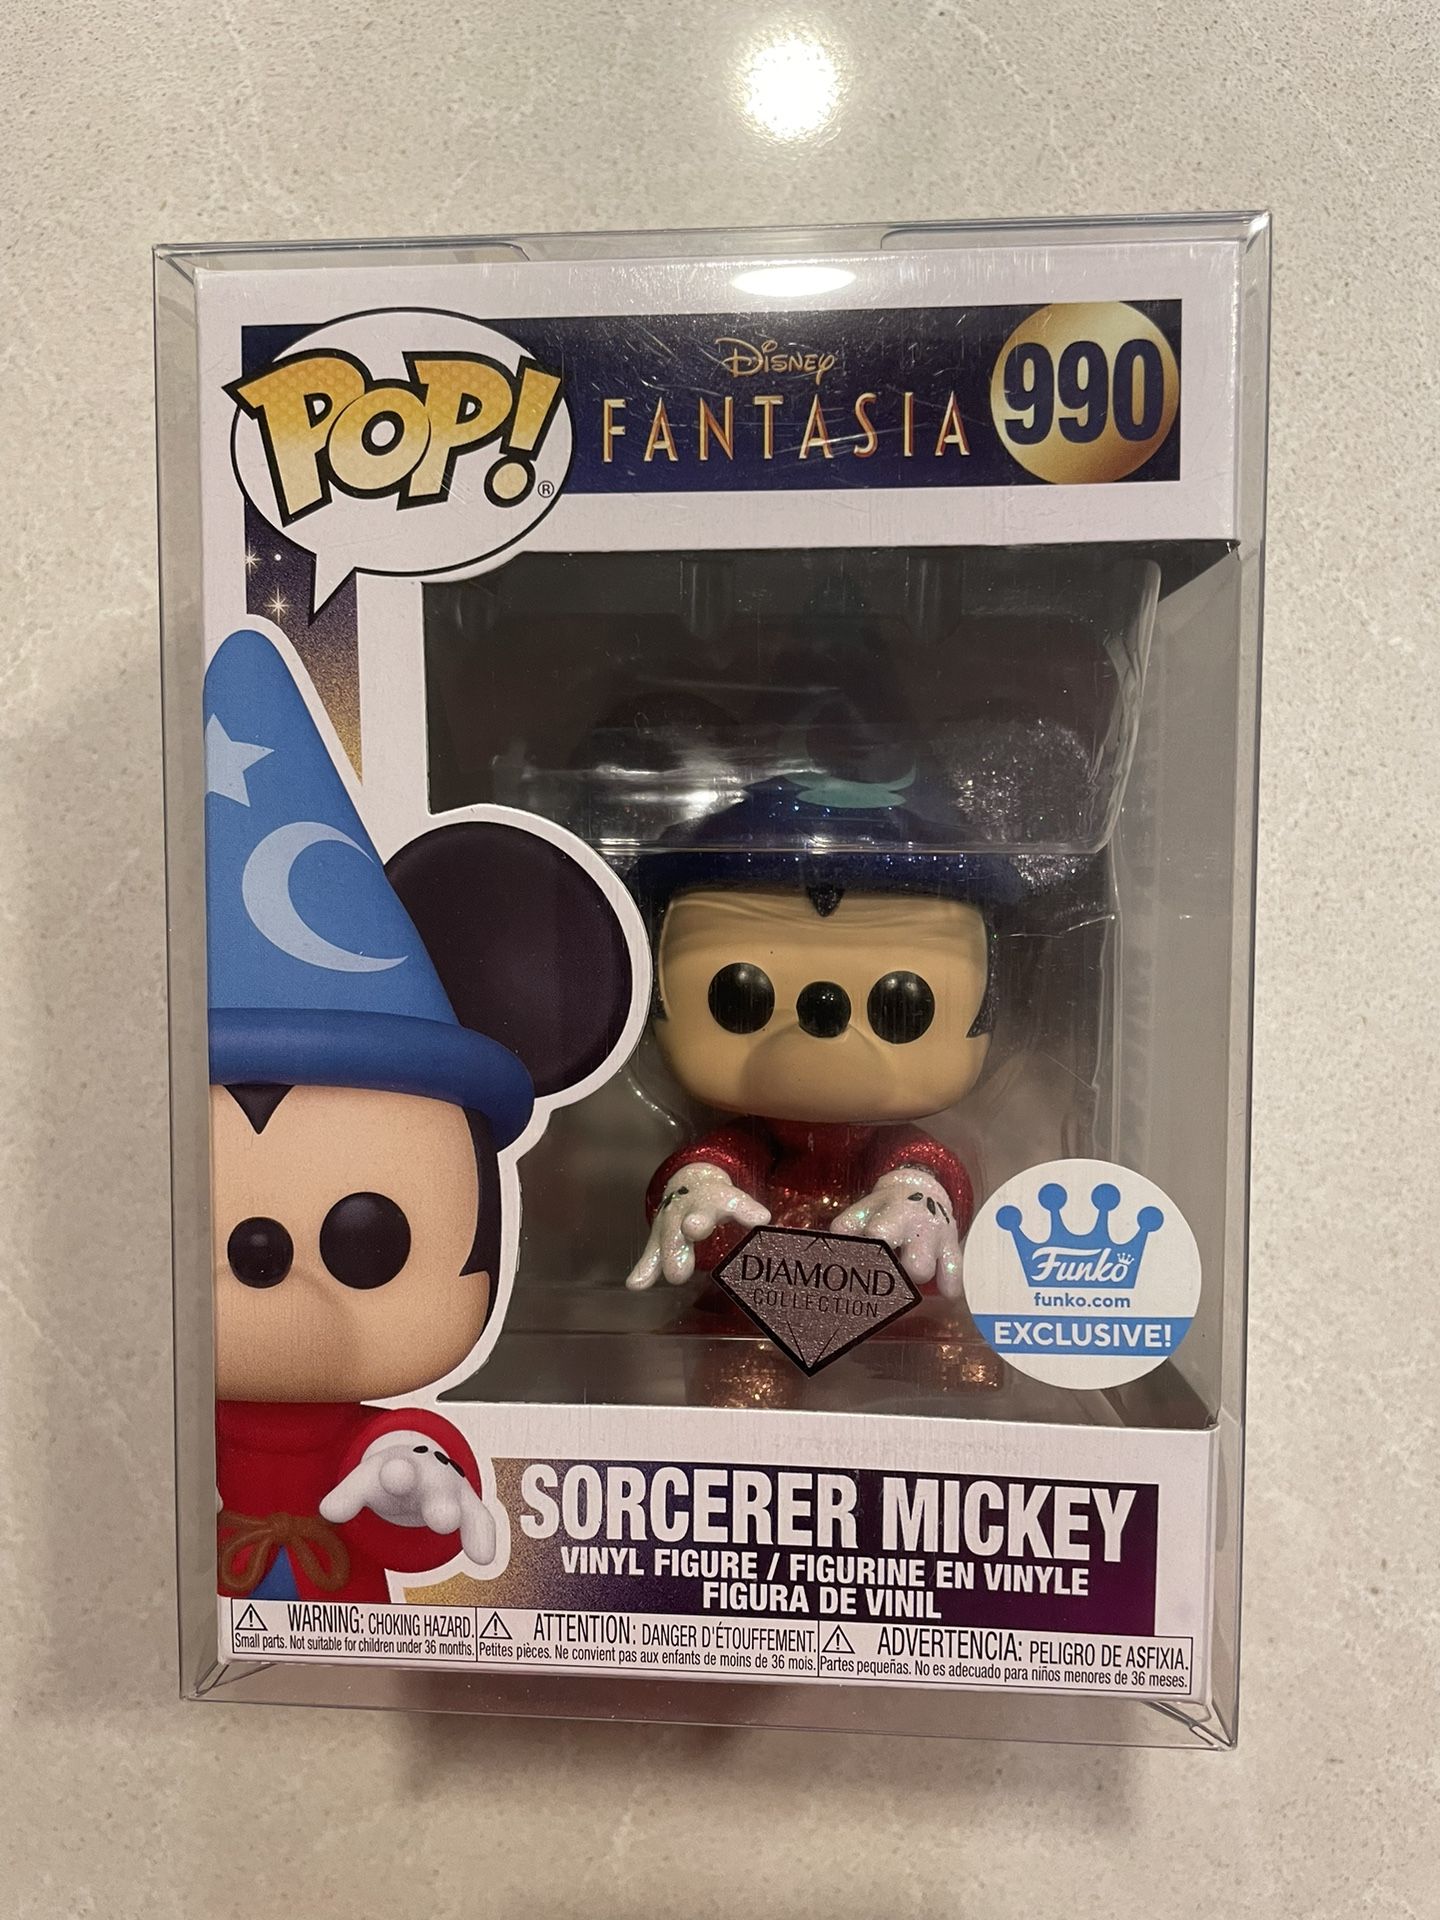 Diamond Sorcerer Mickey Mouse Funko Pop *MINT* Online Funko Shop Exclusive Disney Fantasia 990 with protector